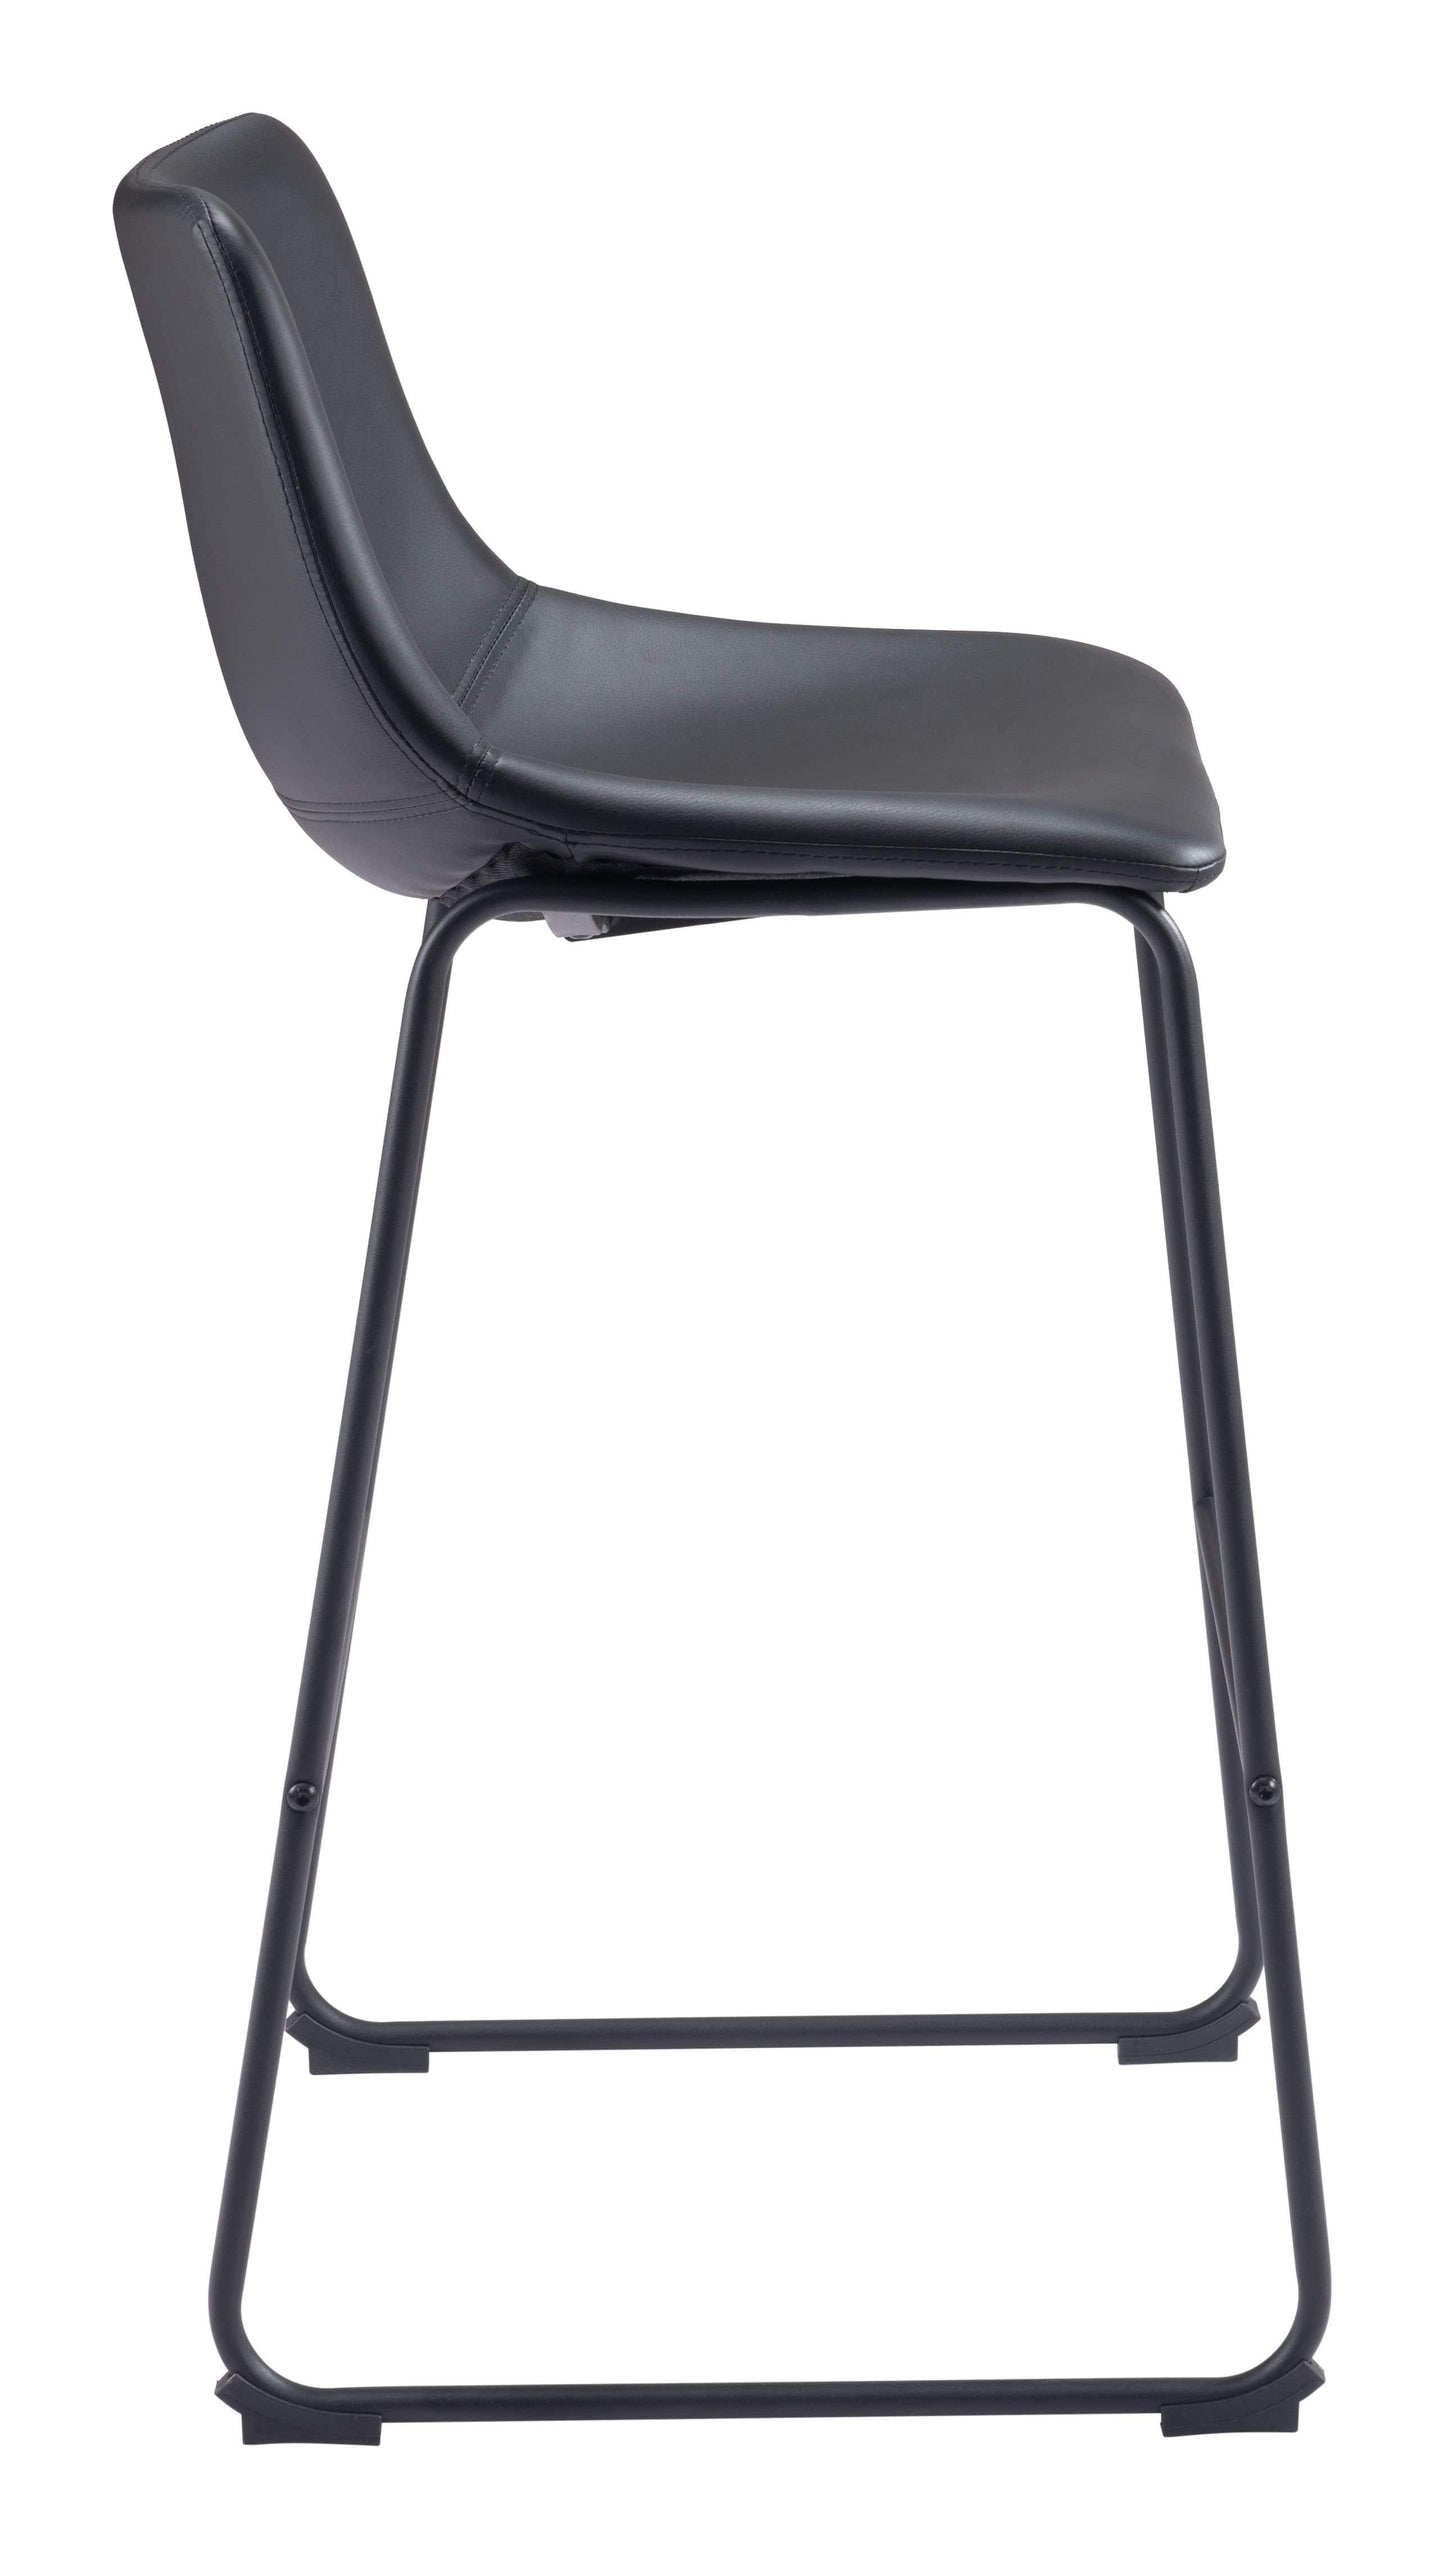 Side view of transitional bar chair